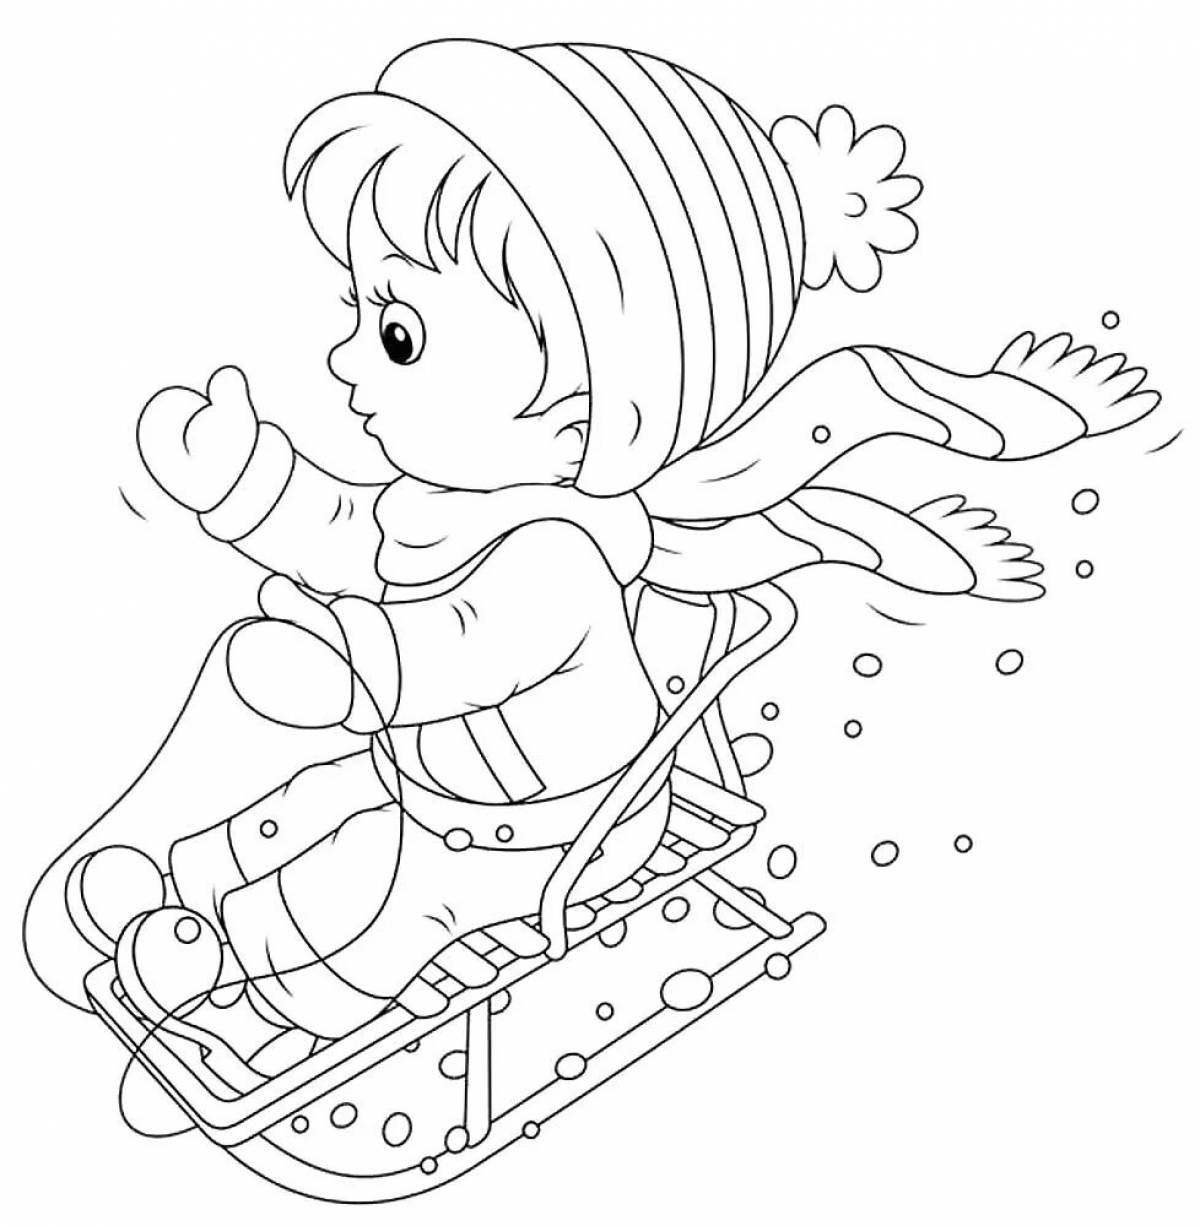 Coloring page funny sledding